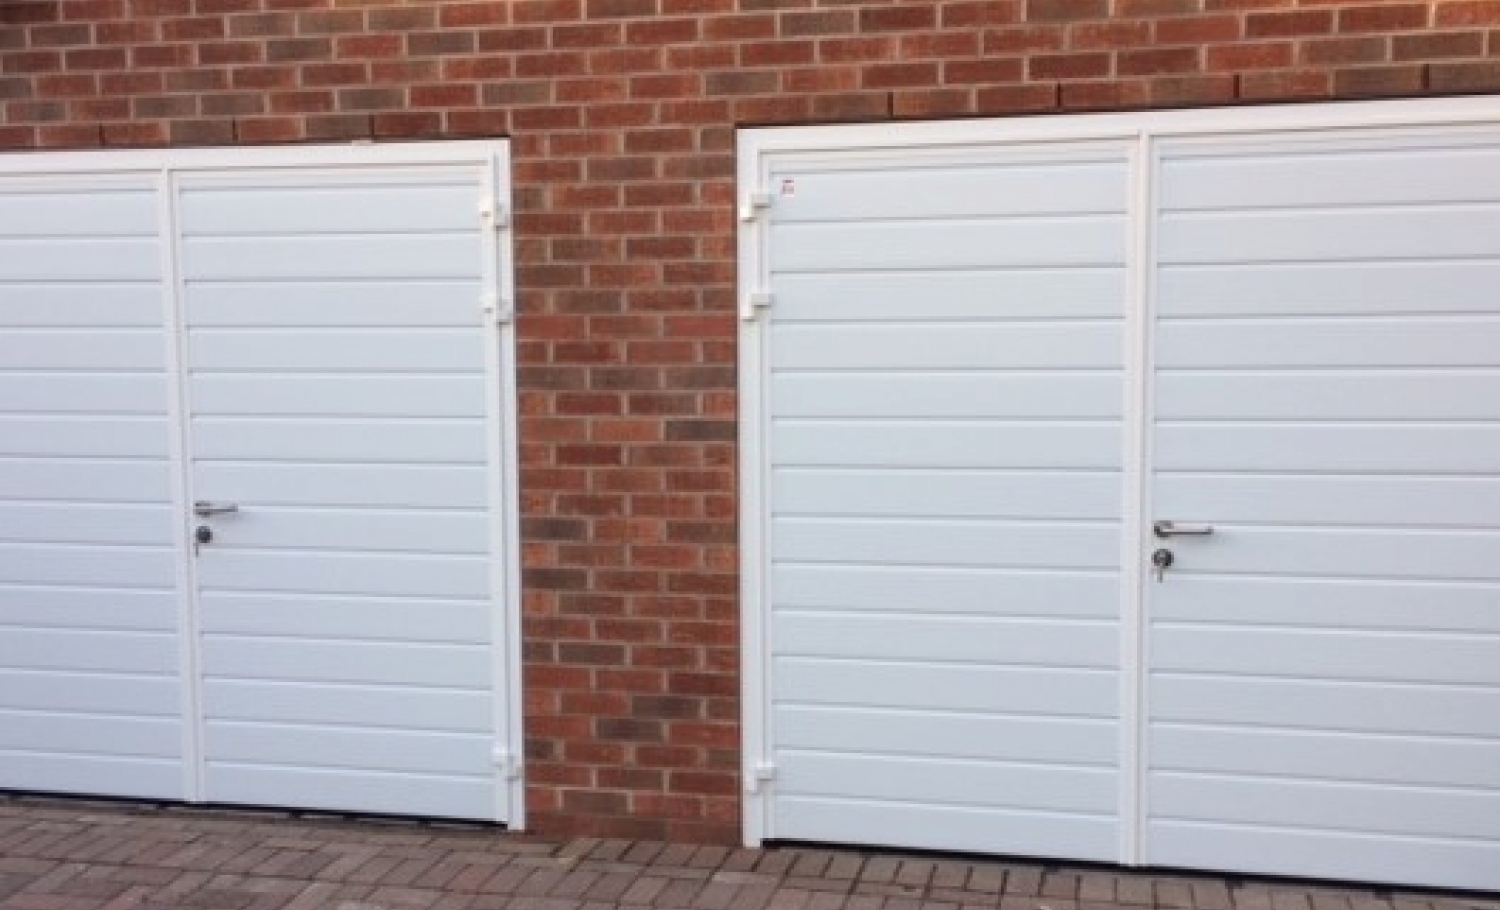 CarTeck GSW 40-L insulated side-hinged doors in standard (small) rib